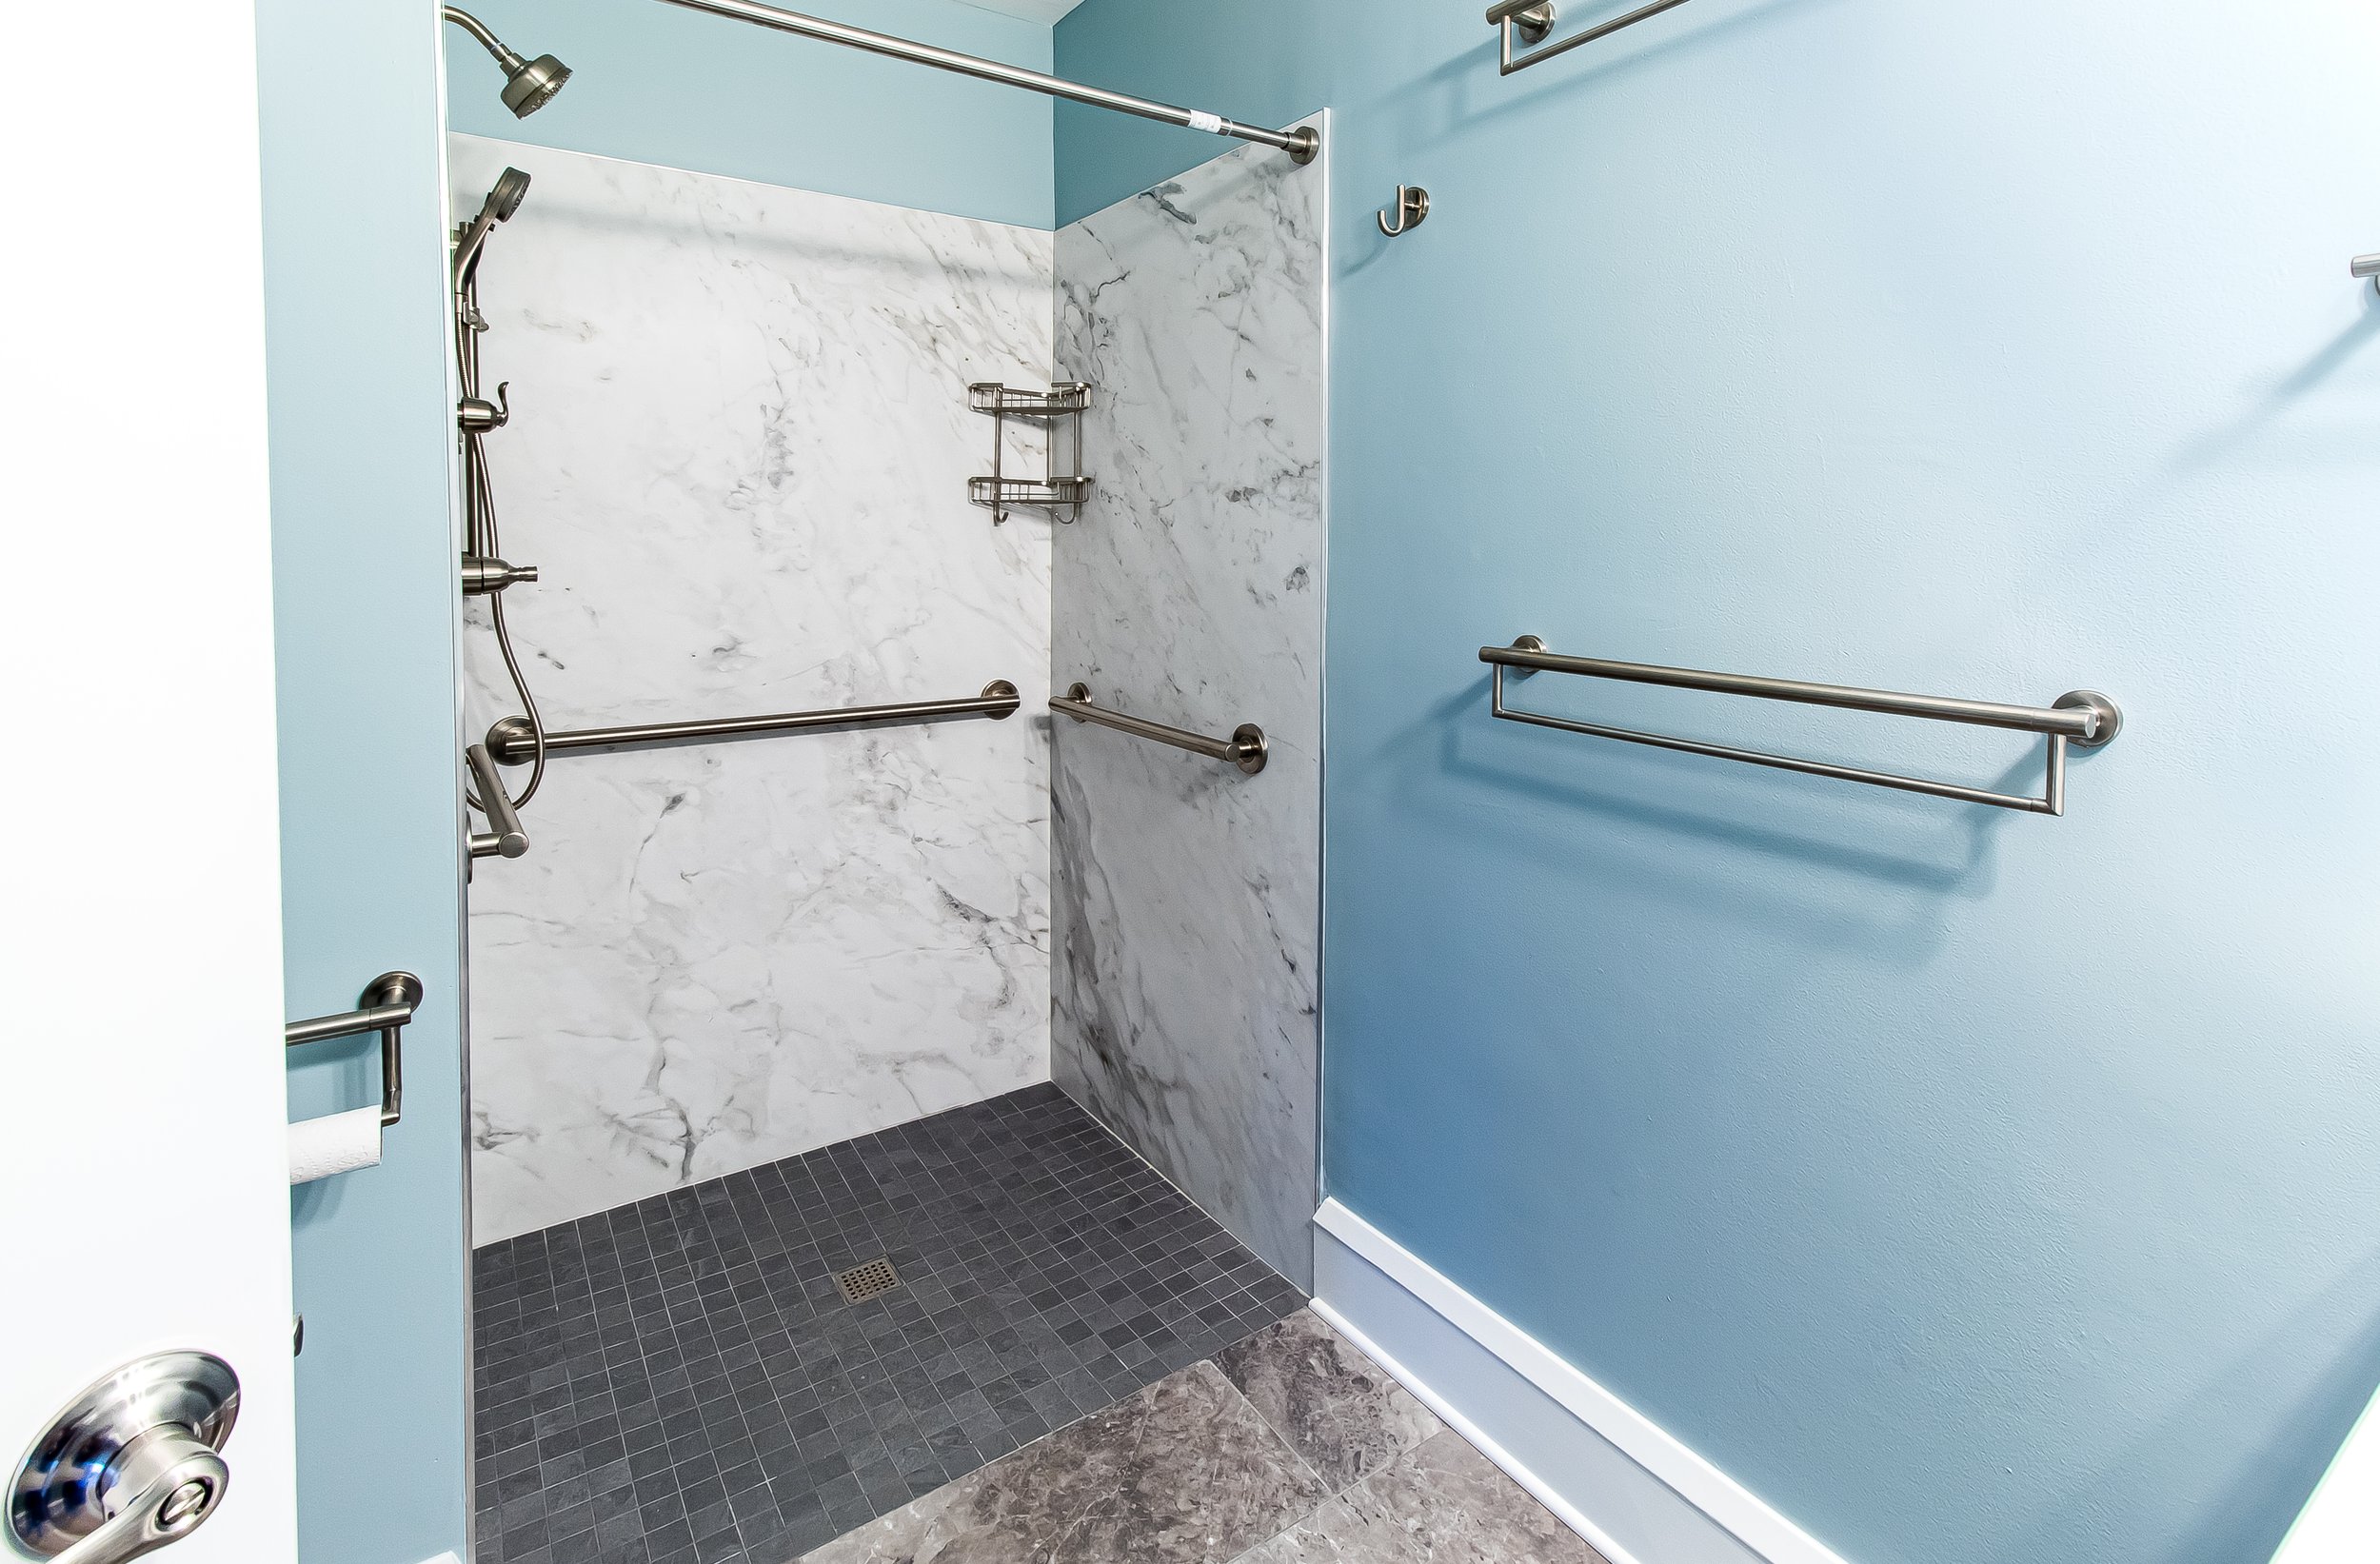 After: Grab Bars and Shower Safety Features